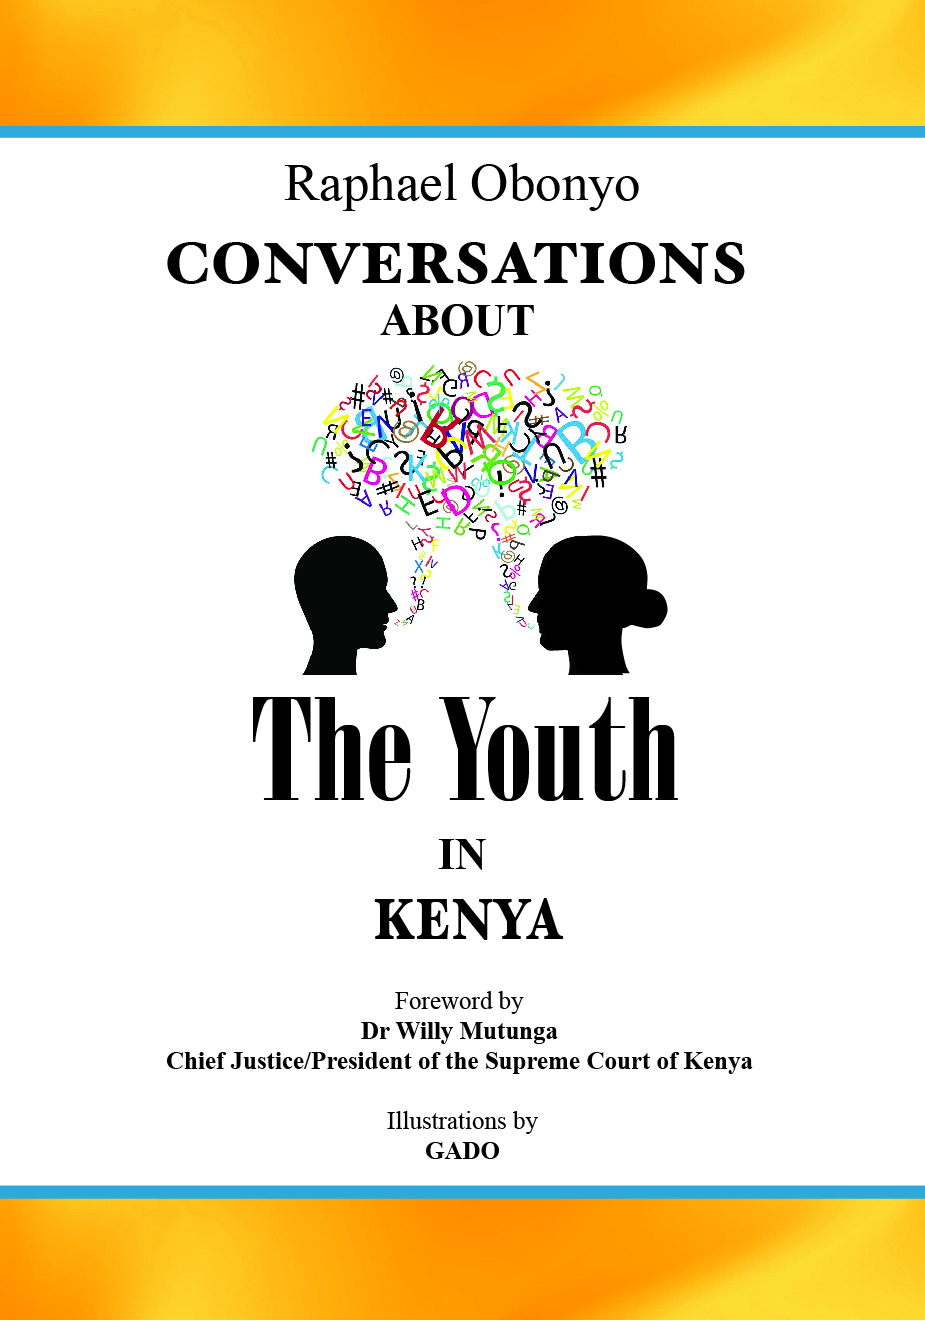 Conversations about the youth in Kenya reflects on development matters concerning the youth